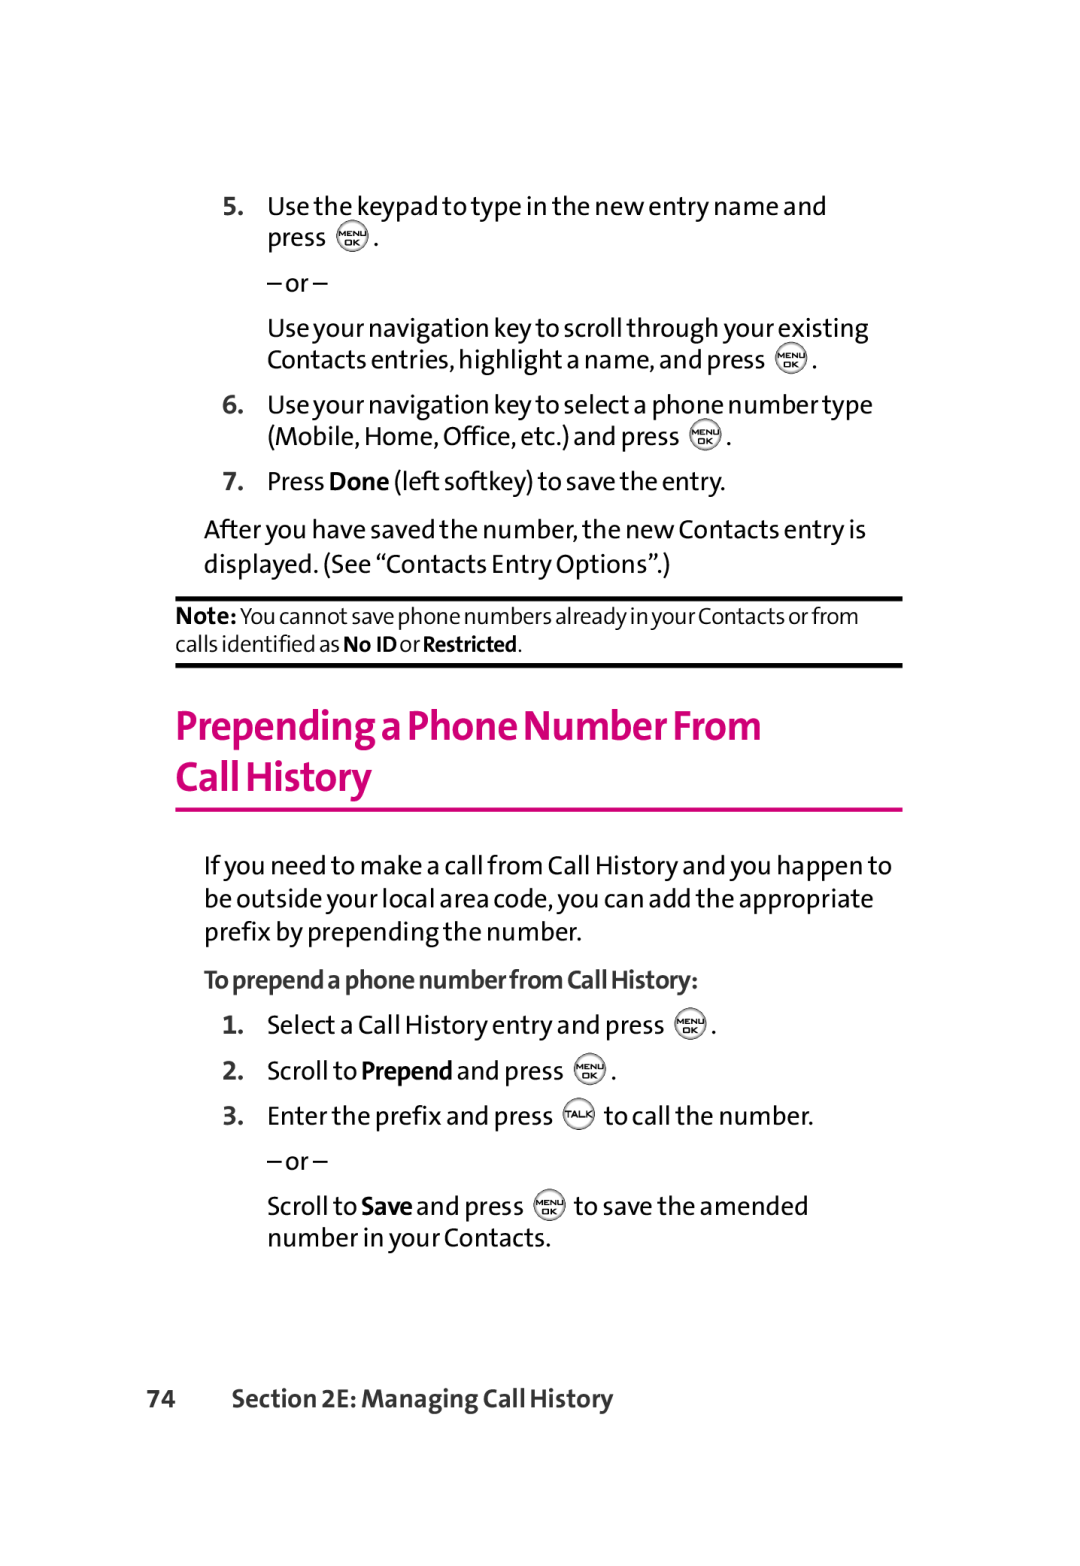 LG Electronics 350 manual Prepending a Phone NumberFrom Call History, ToprependaphonenumberfromCallHistory 